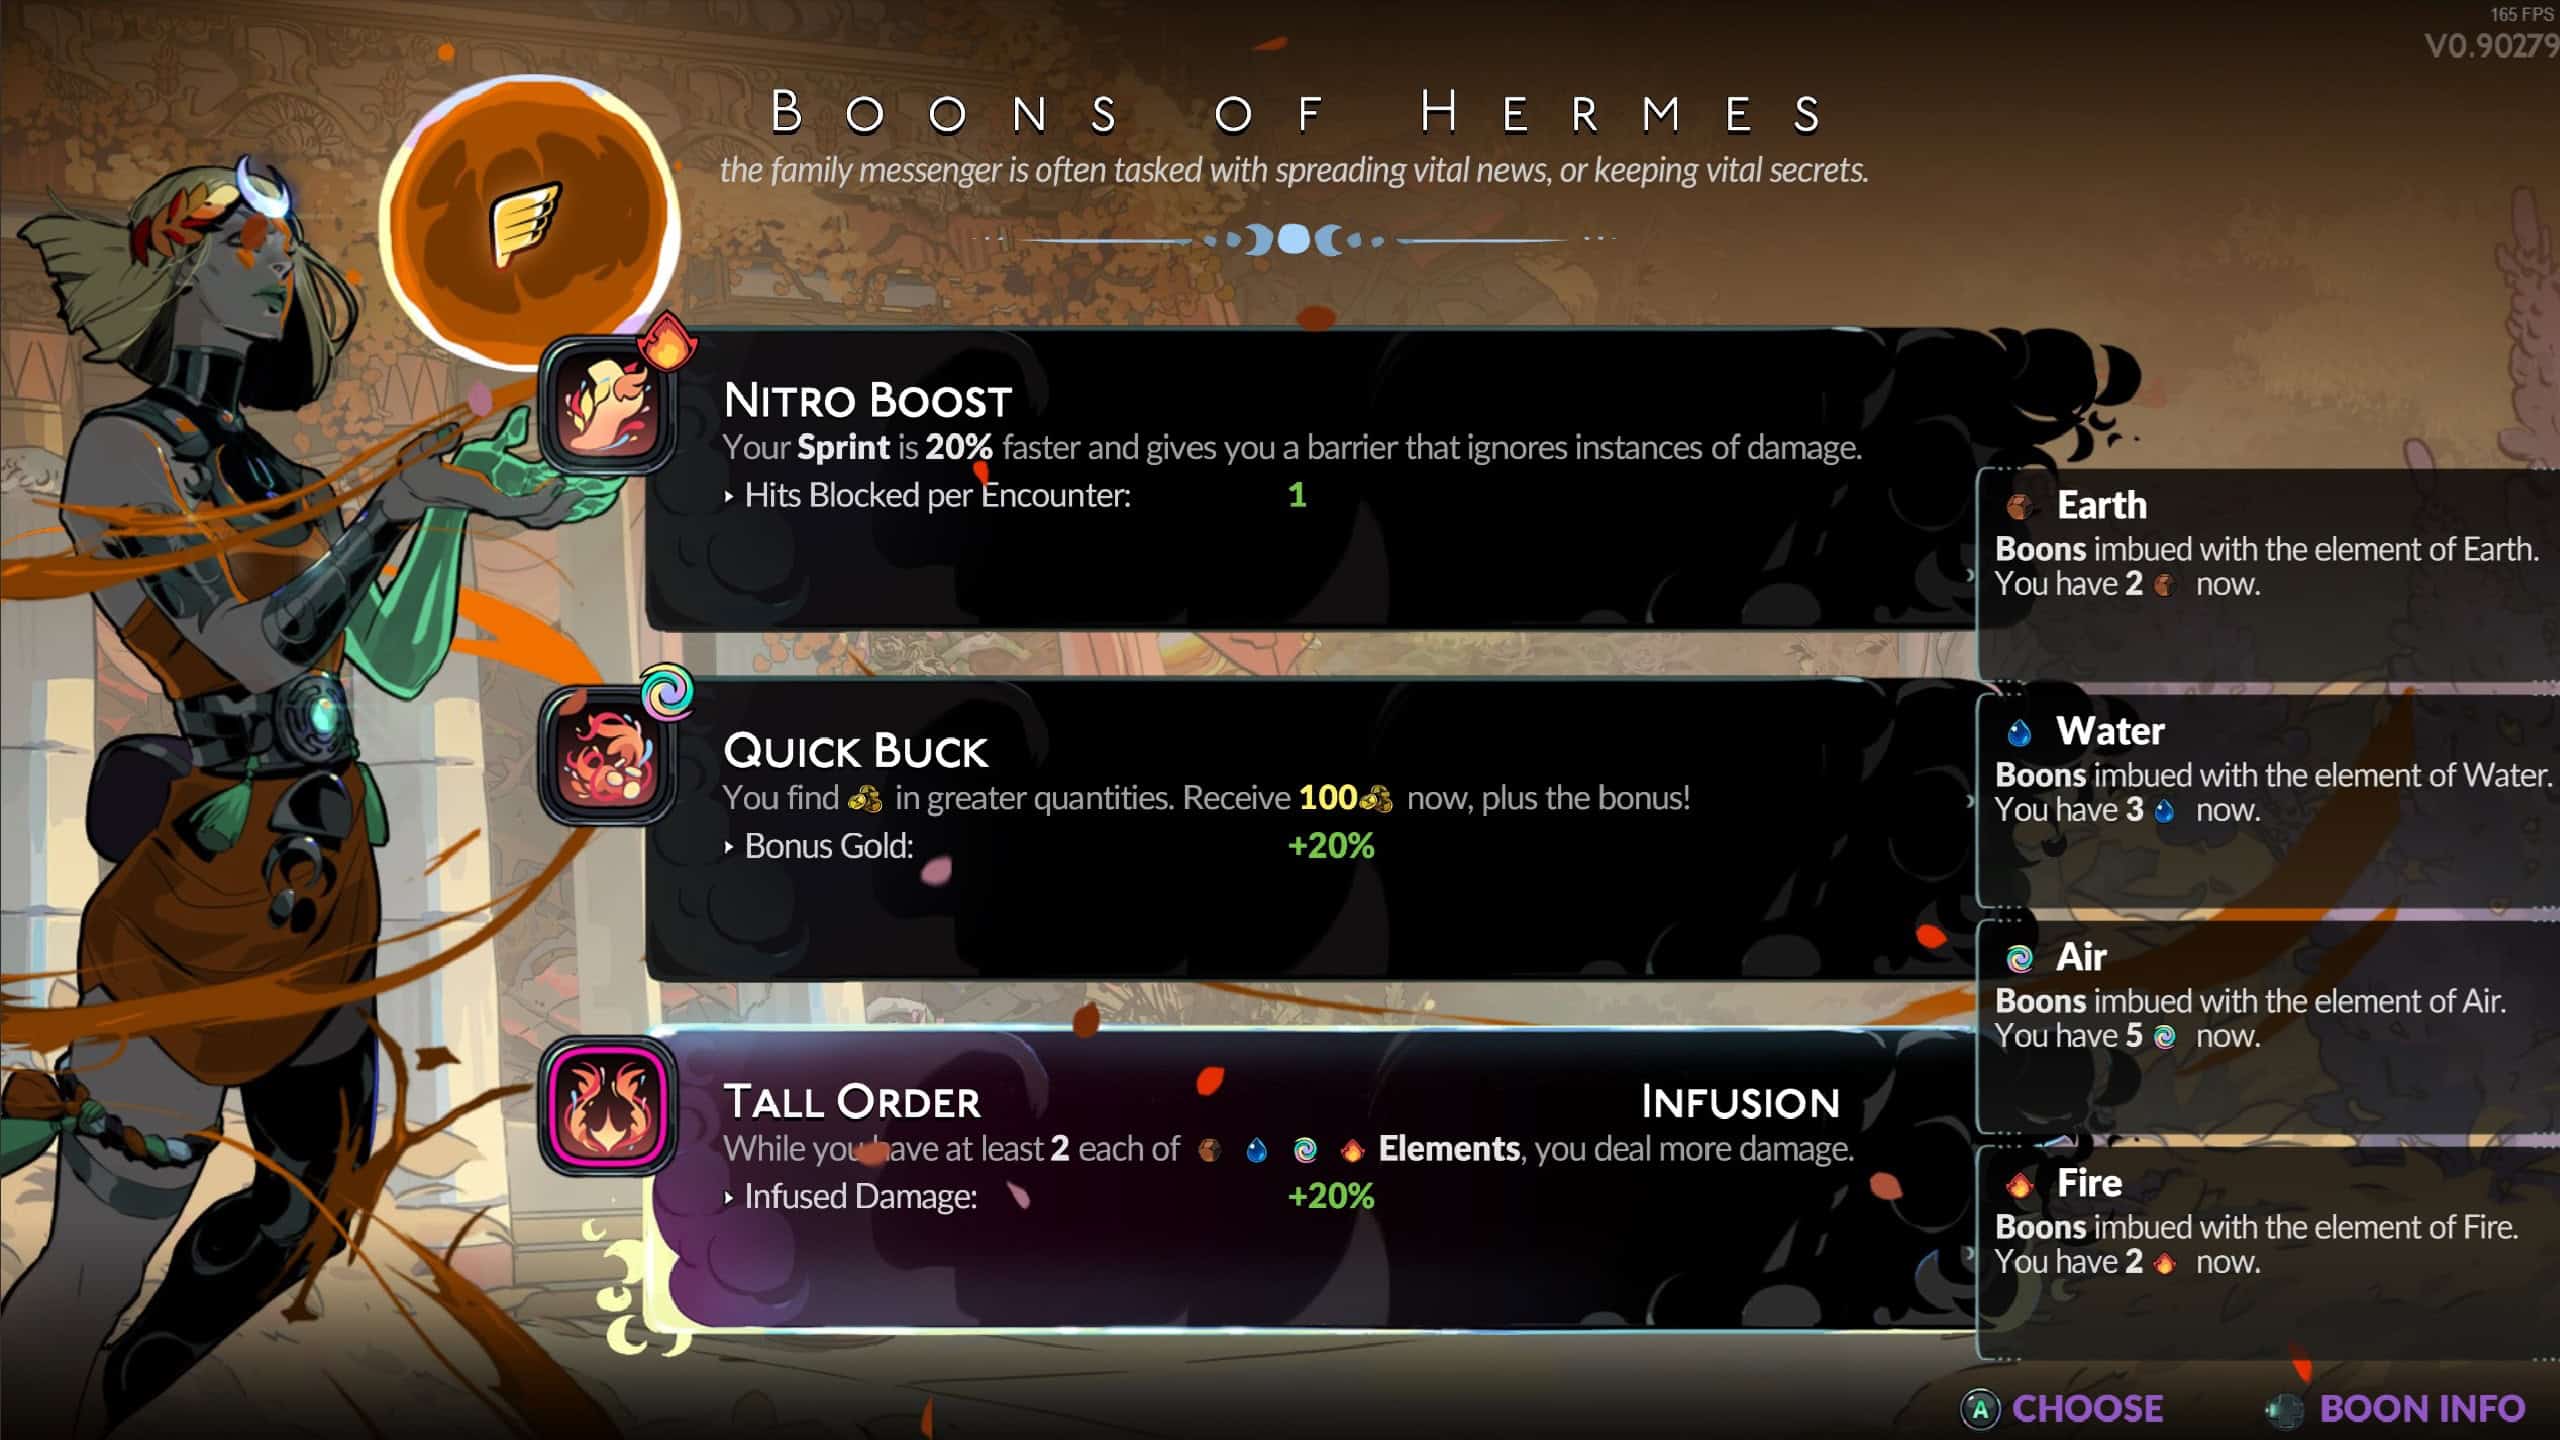 Hades 2 review: A player checks out the boons offered by Hermes in the game. Image captured by VideoGamer.